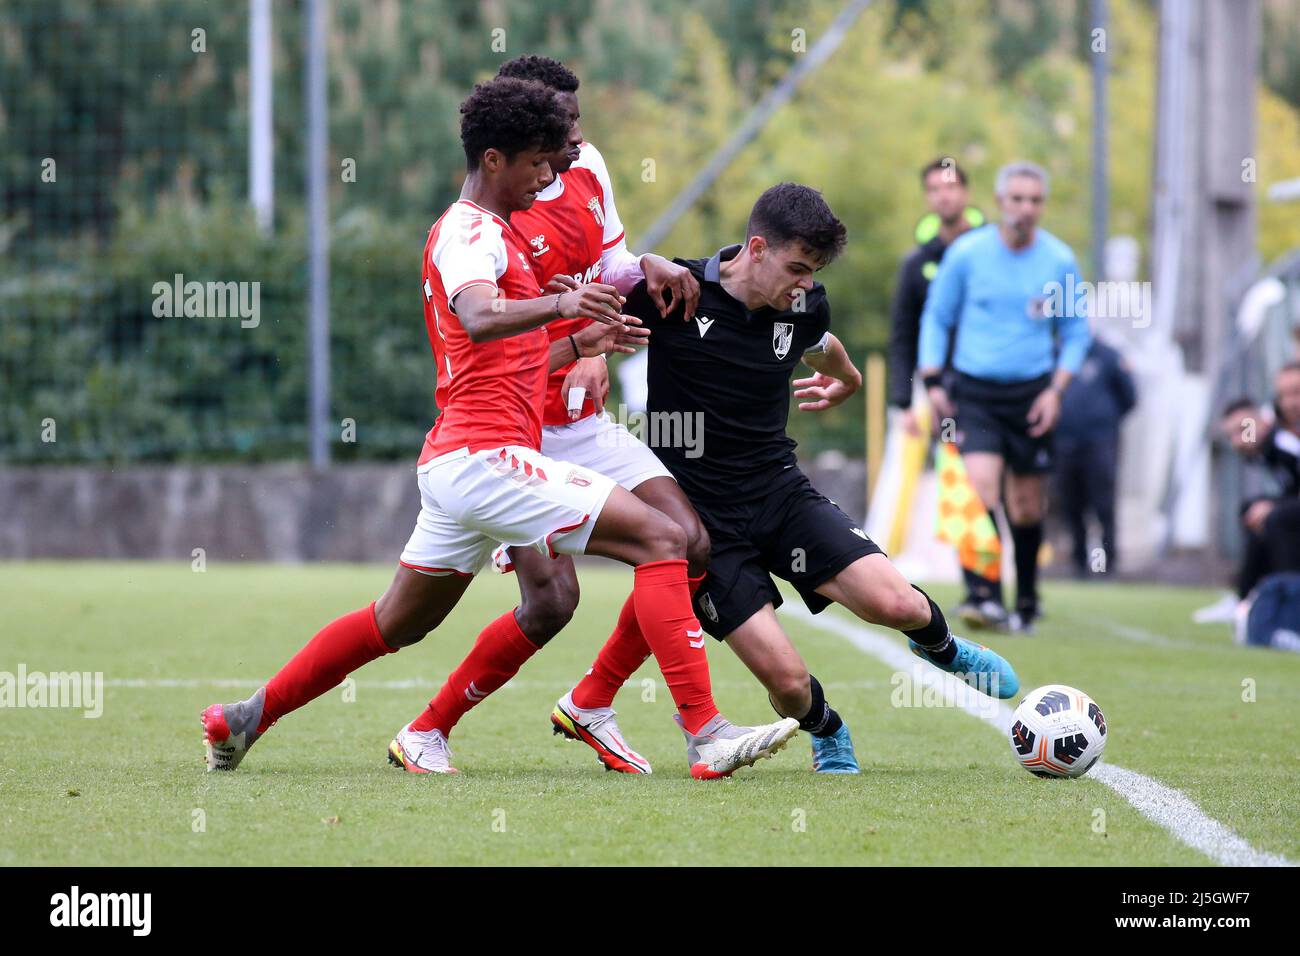 Guimarães, 04/23/2022 - Vitória Sport Clube faced Sporting Clube de Braga,  this afternoon, in the 9th round of the National Championship Qualification  of the 1st Junior Division A 2021/22. The game was